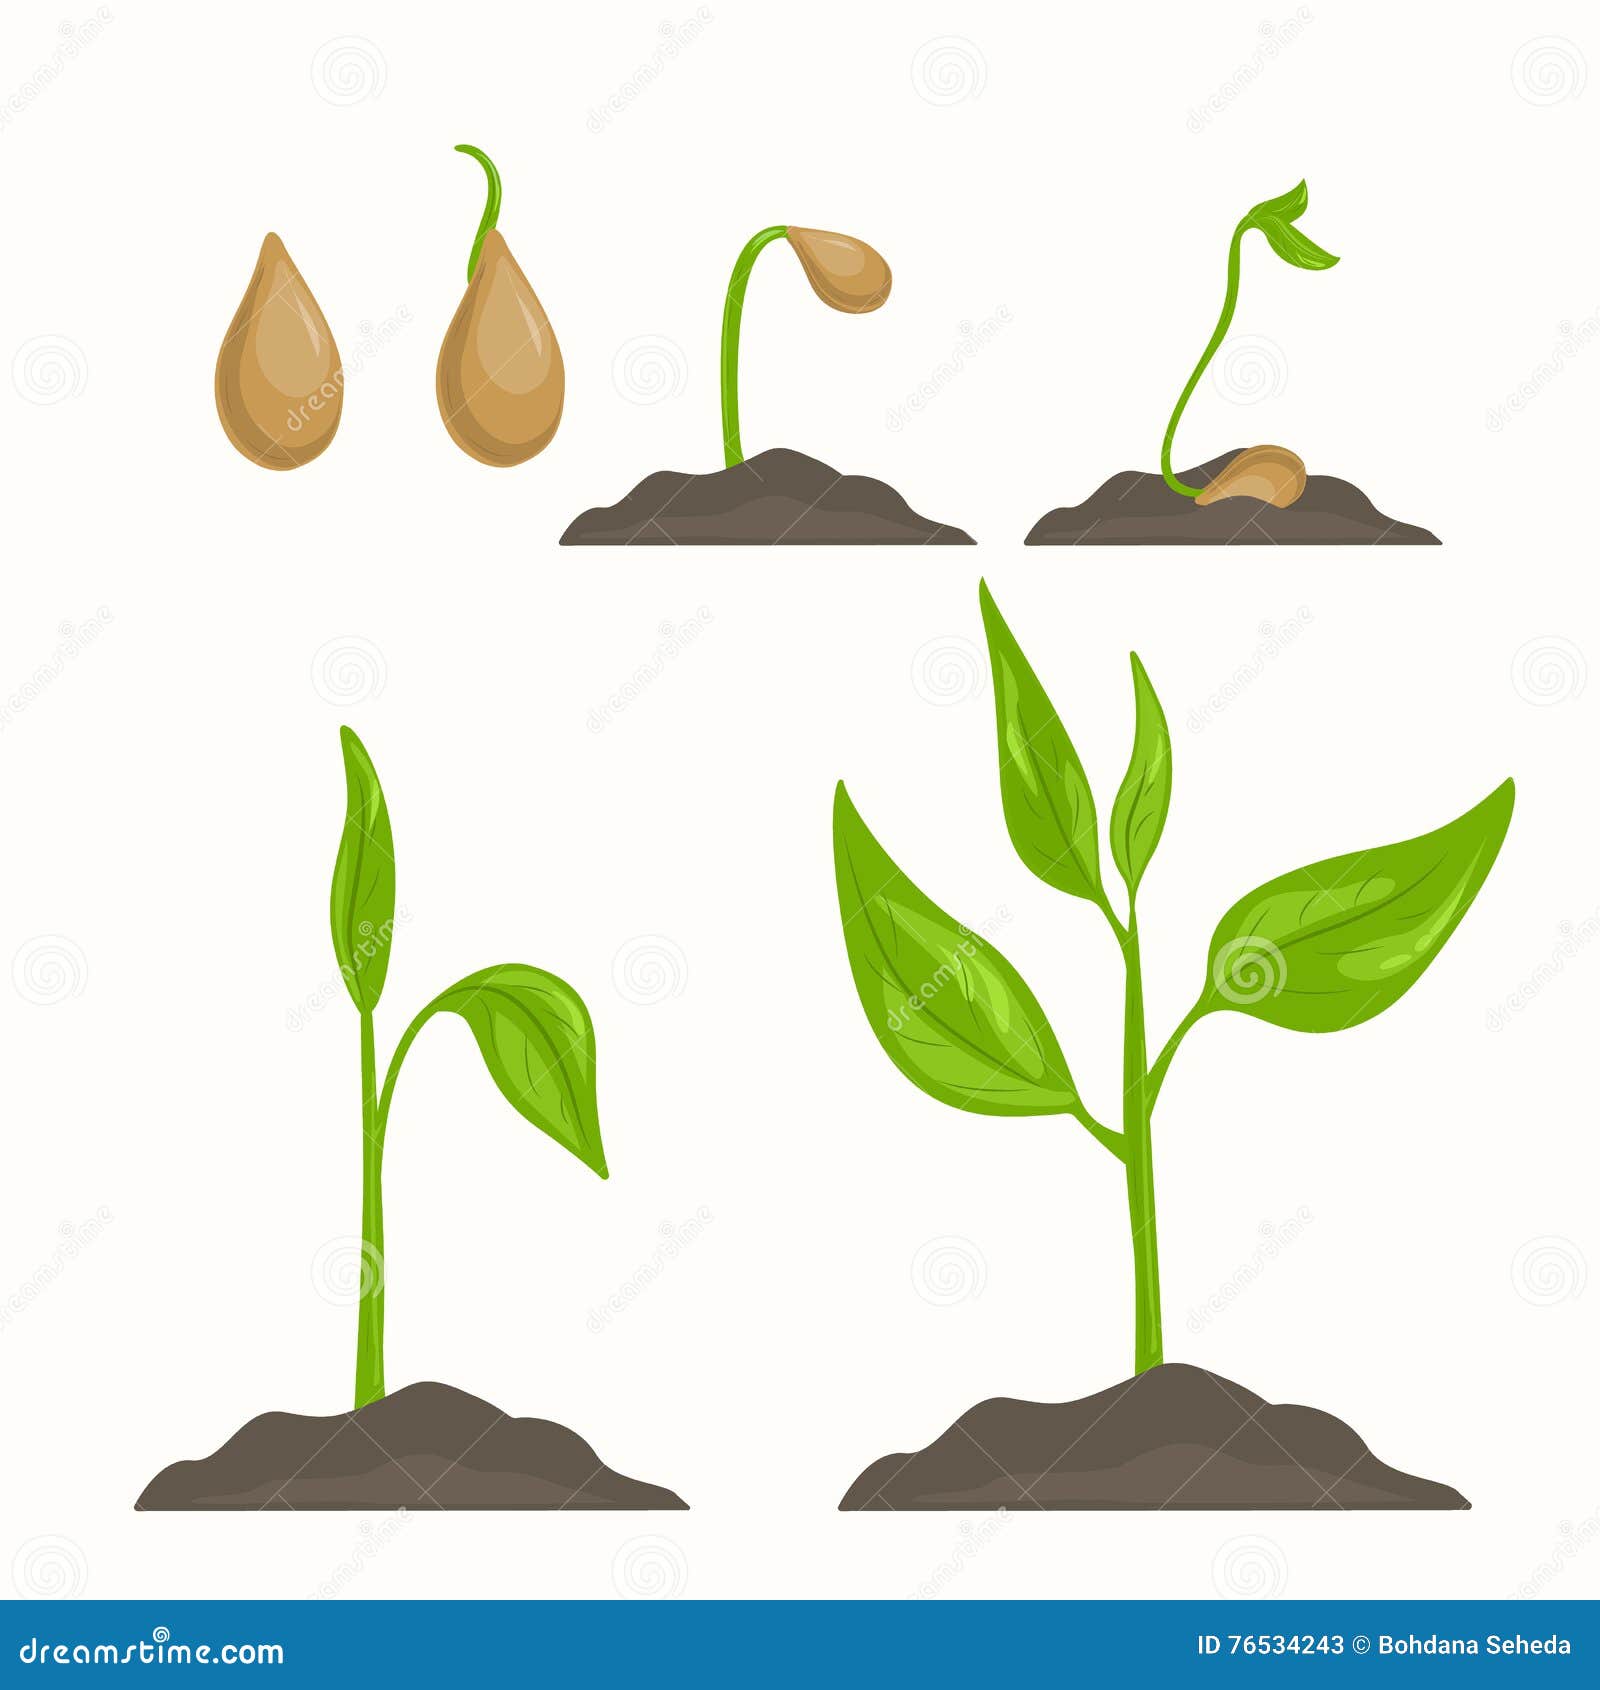 plant life cycle clipart - photo #49